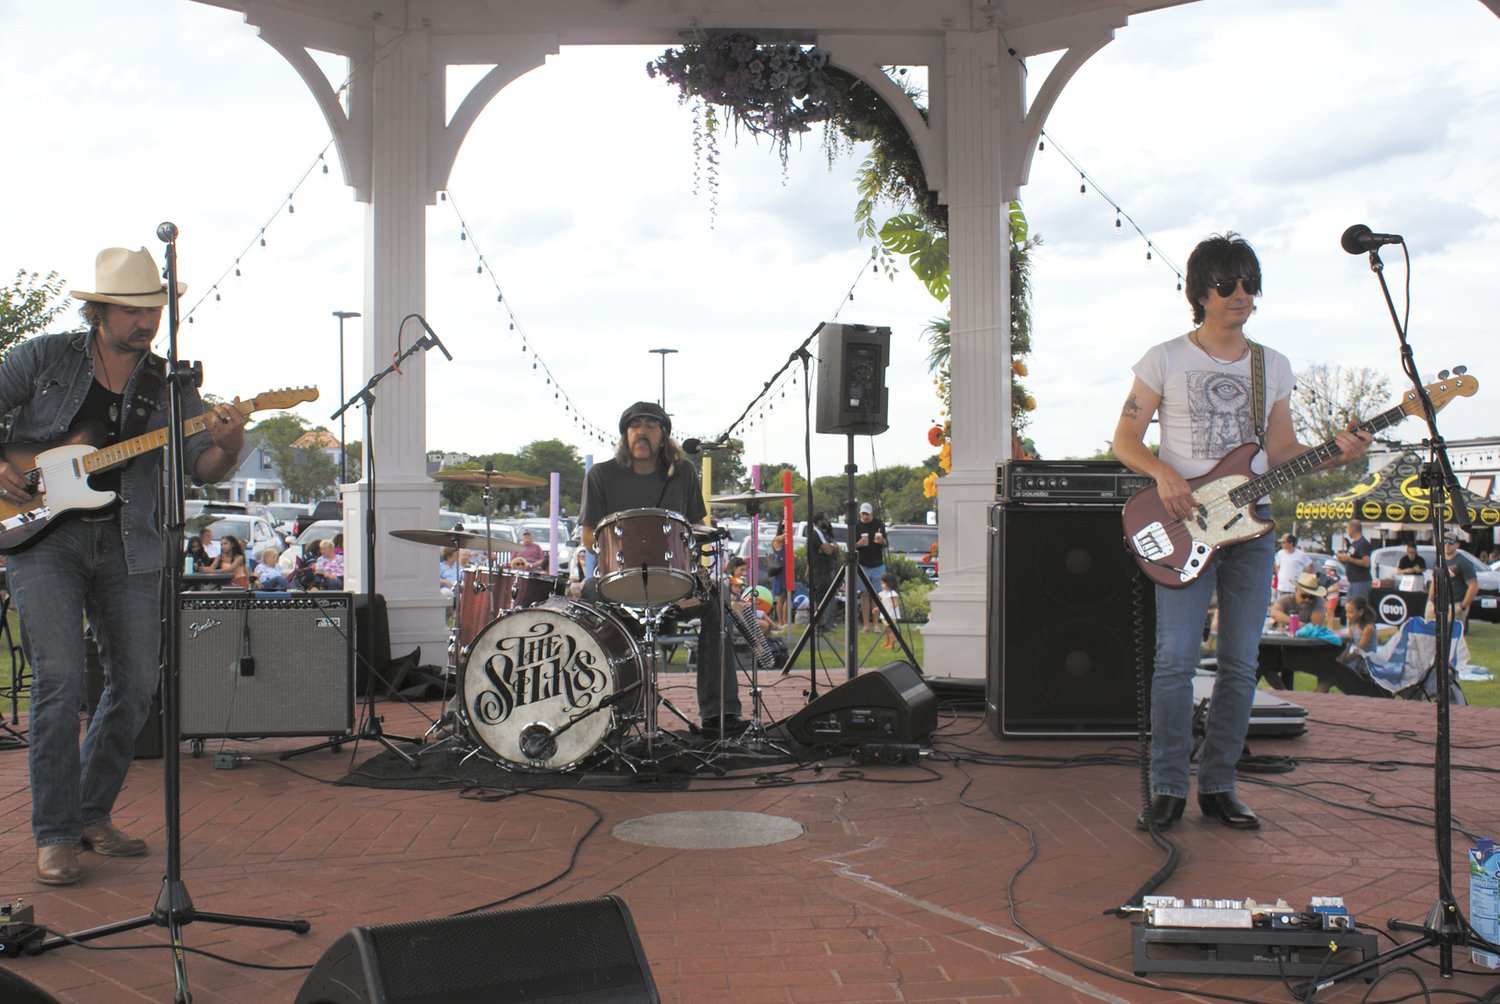 BACK TO THE BANDS: The Silks performed the first Garden City Concert of the season. The members of the band are Tyler-James Kelly on guitar, “Uncle” Sam Jodrey on drums and Jonas Parmelee on bass.